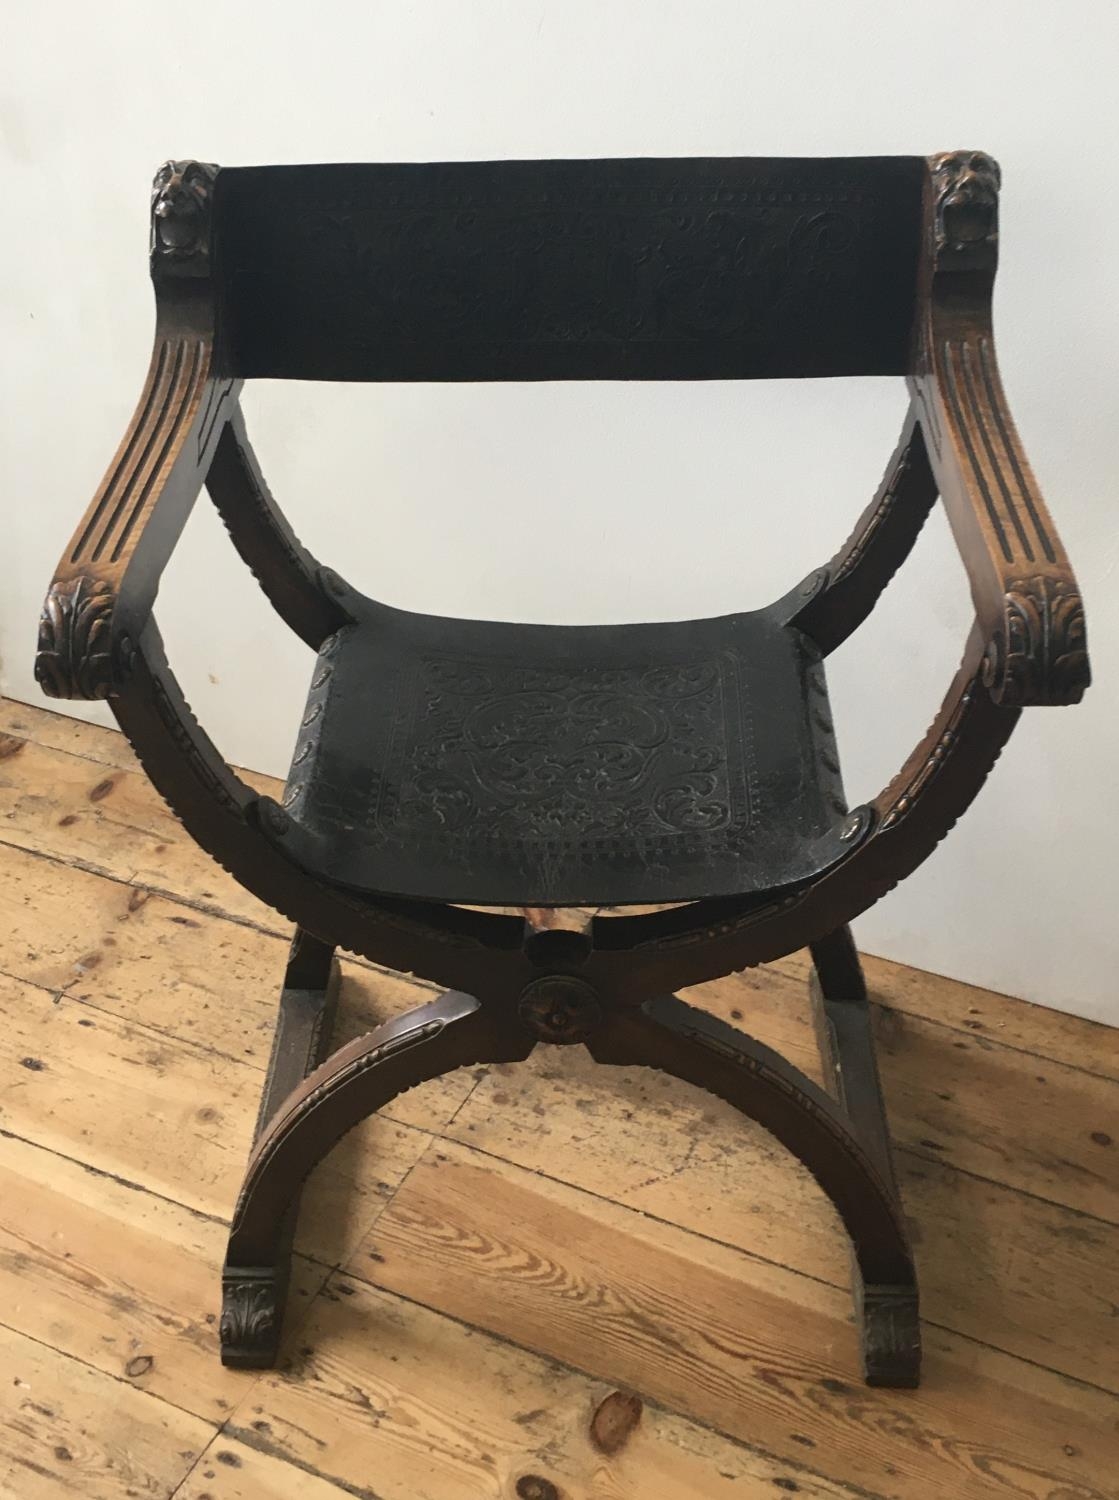 19th CENTURY SAVANAROLA FOLDING CHAIR, with ornate embossed leather seat and back panels 89cm high x - Image 2 of 3